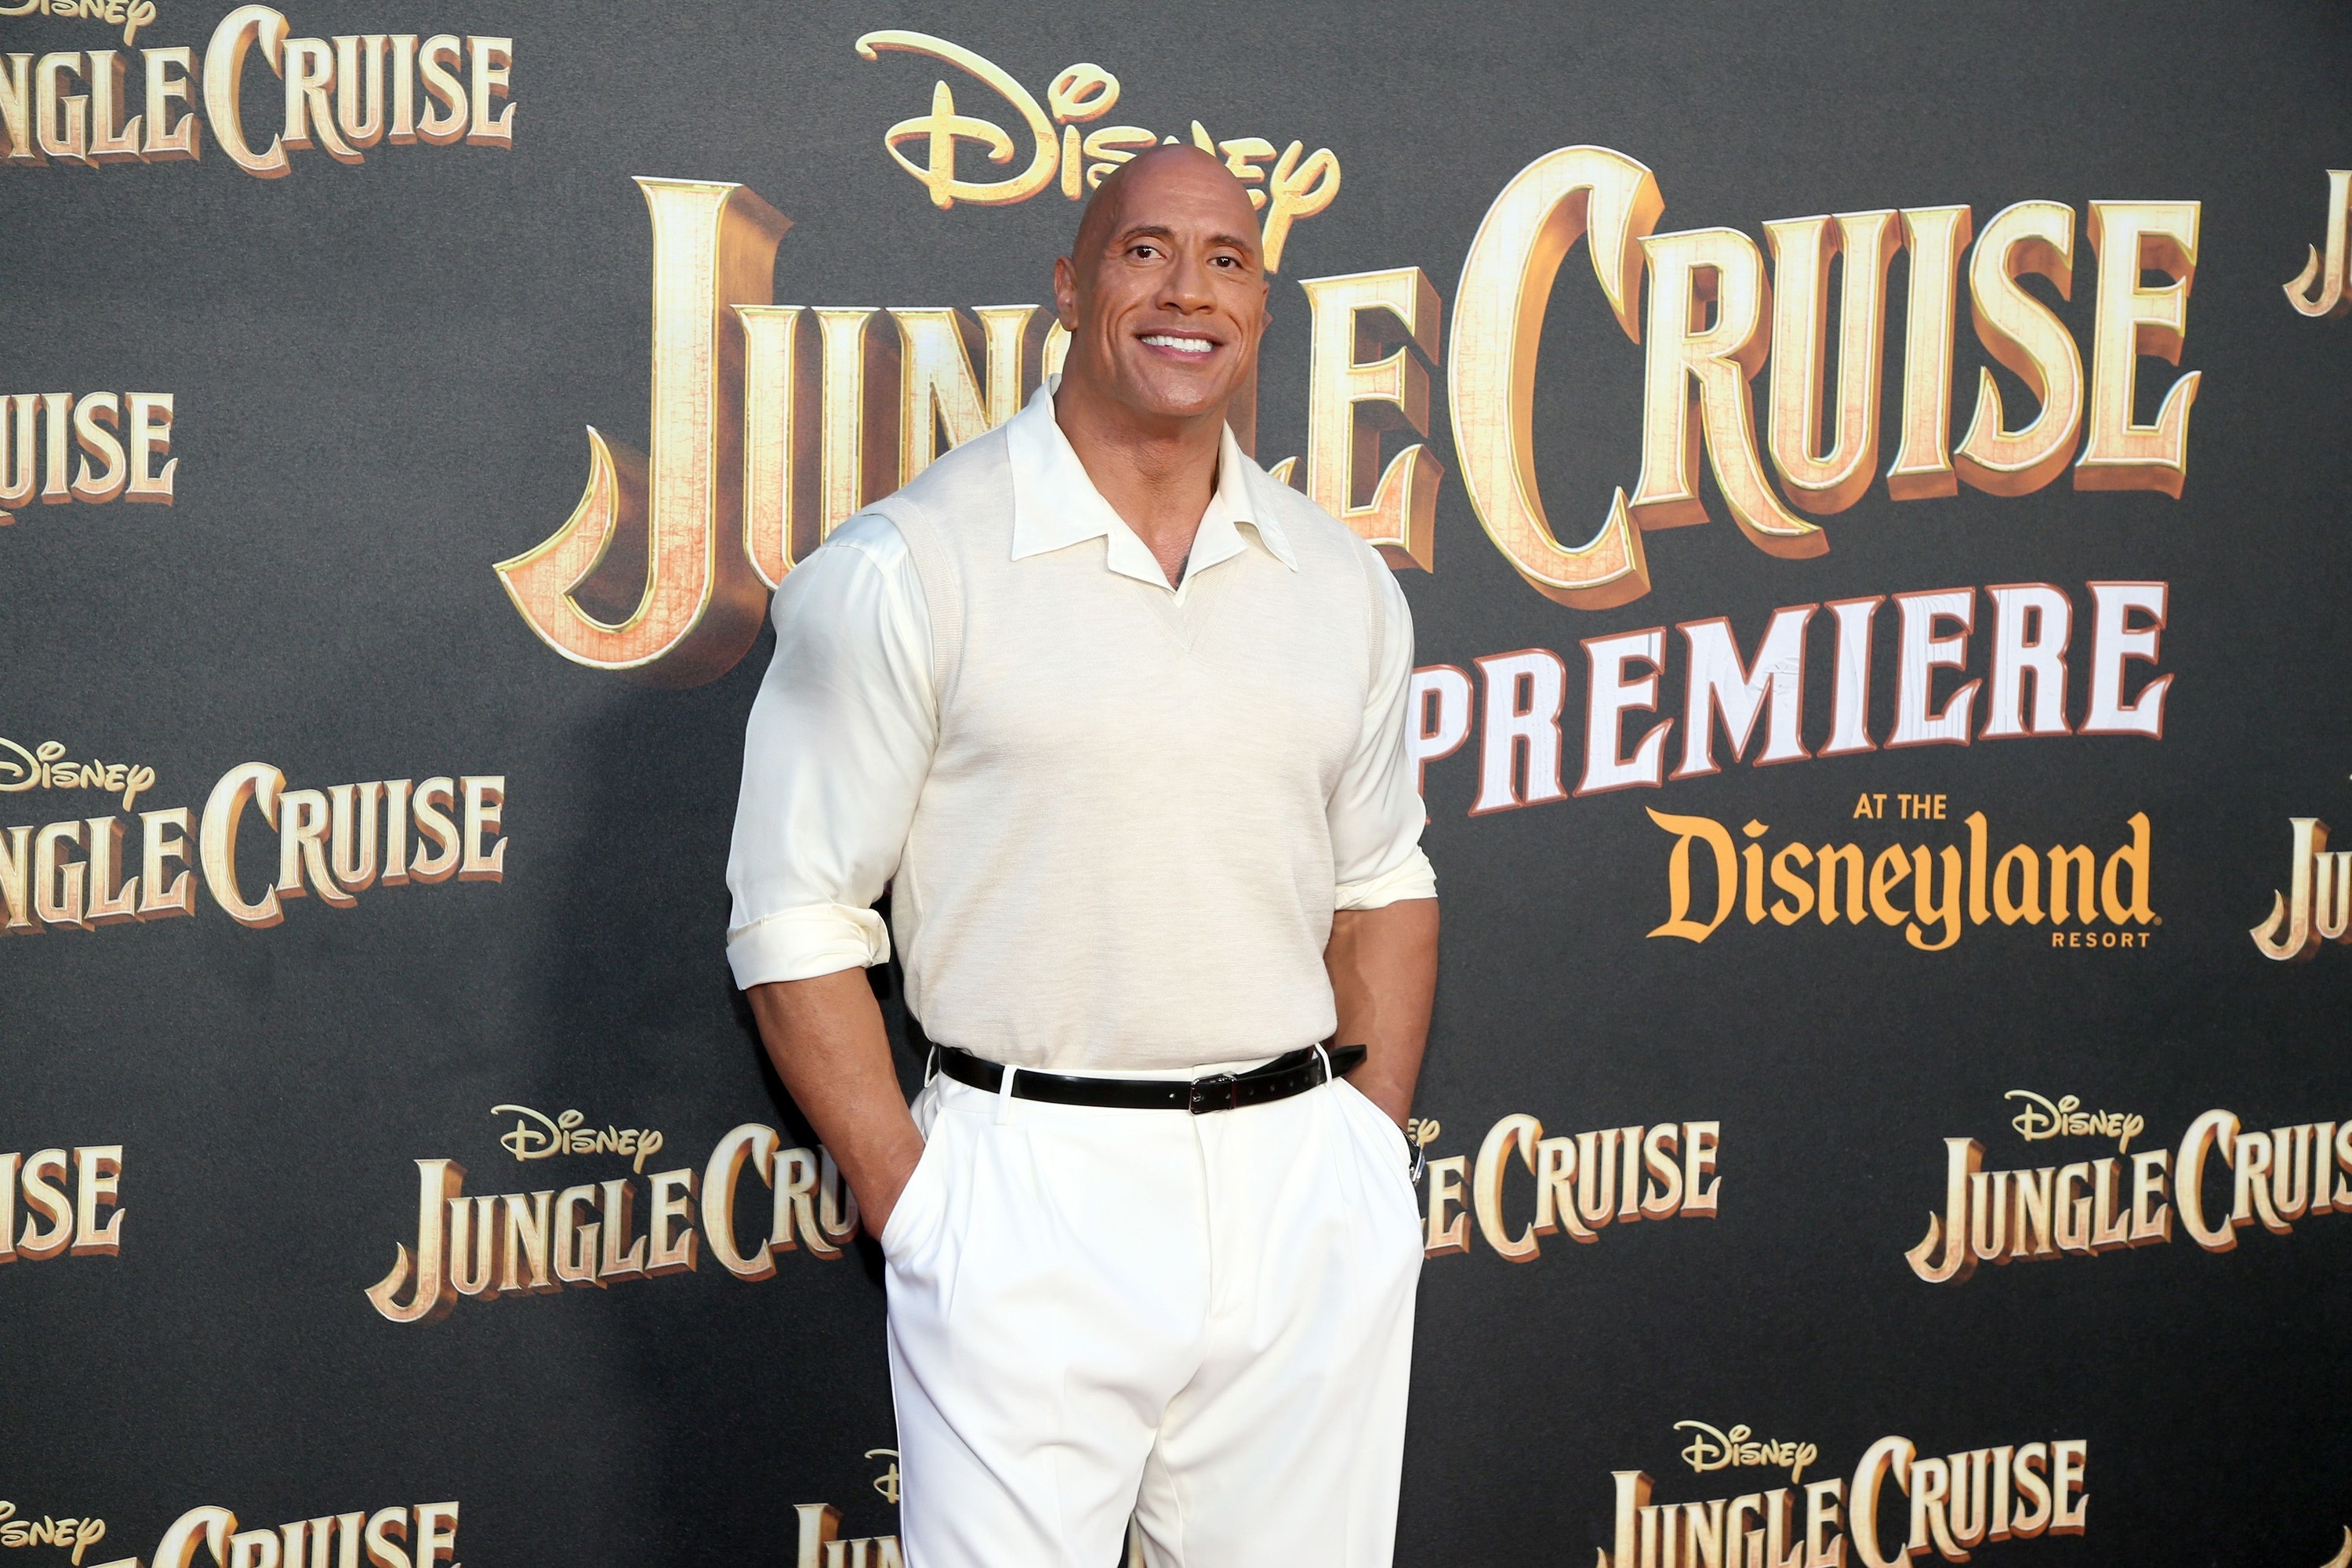 Dwayne poses with his hands in his pockets at a Jungle Cruise step-and-repeat